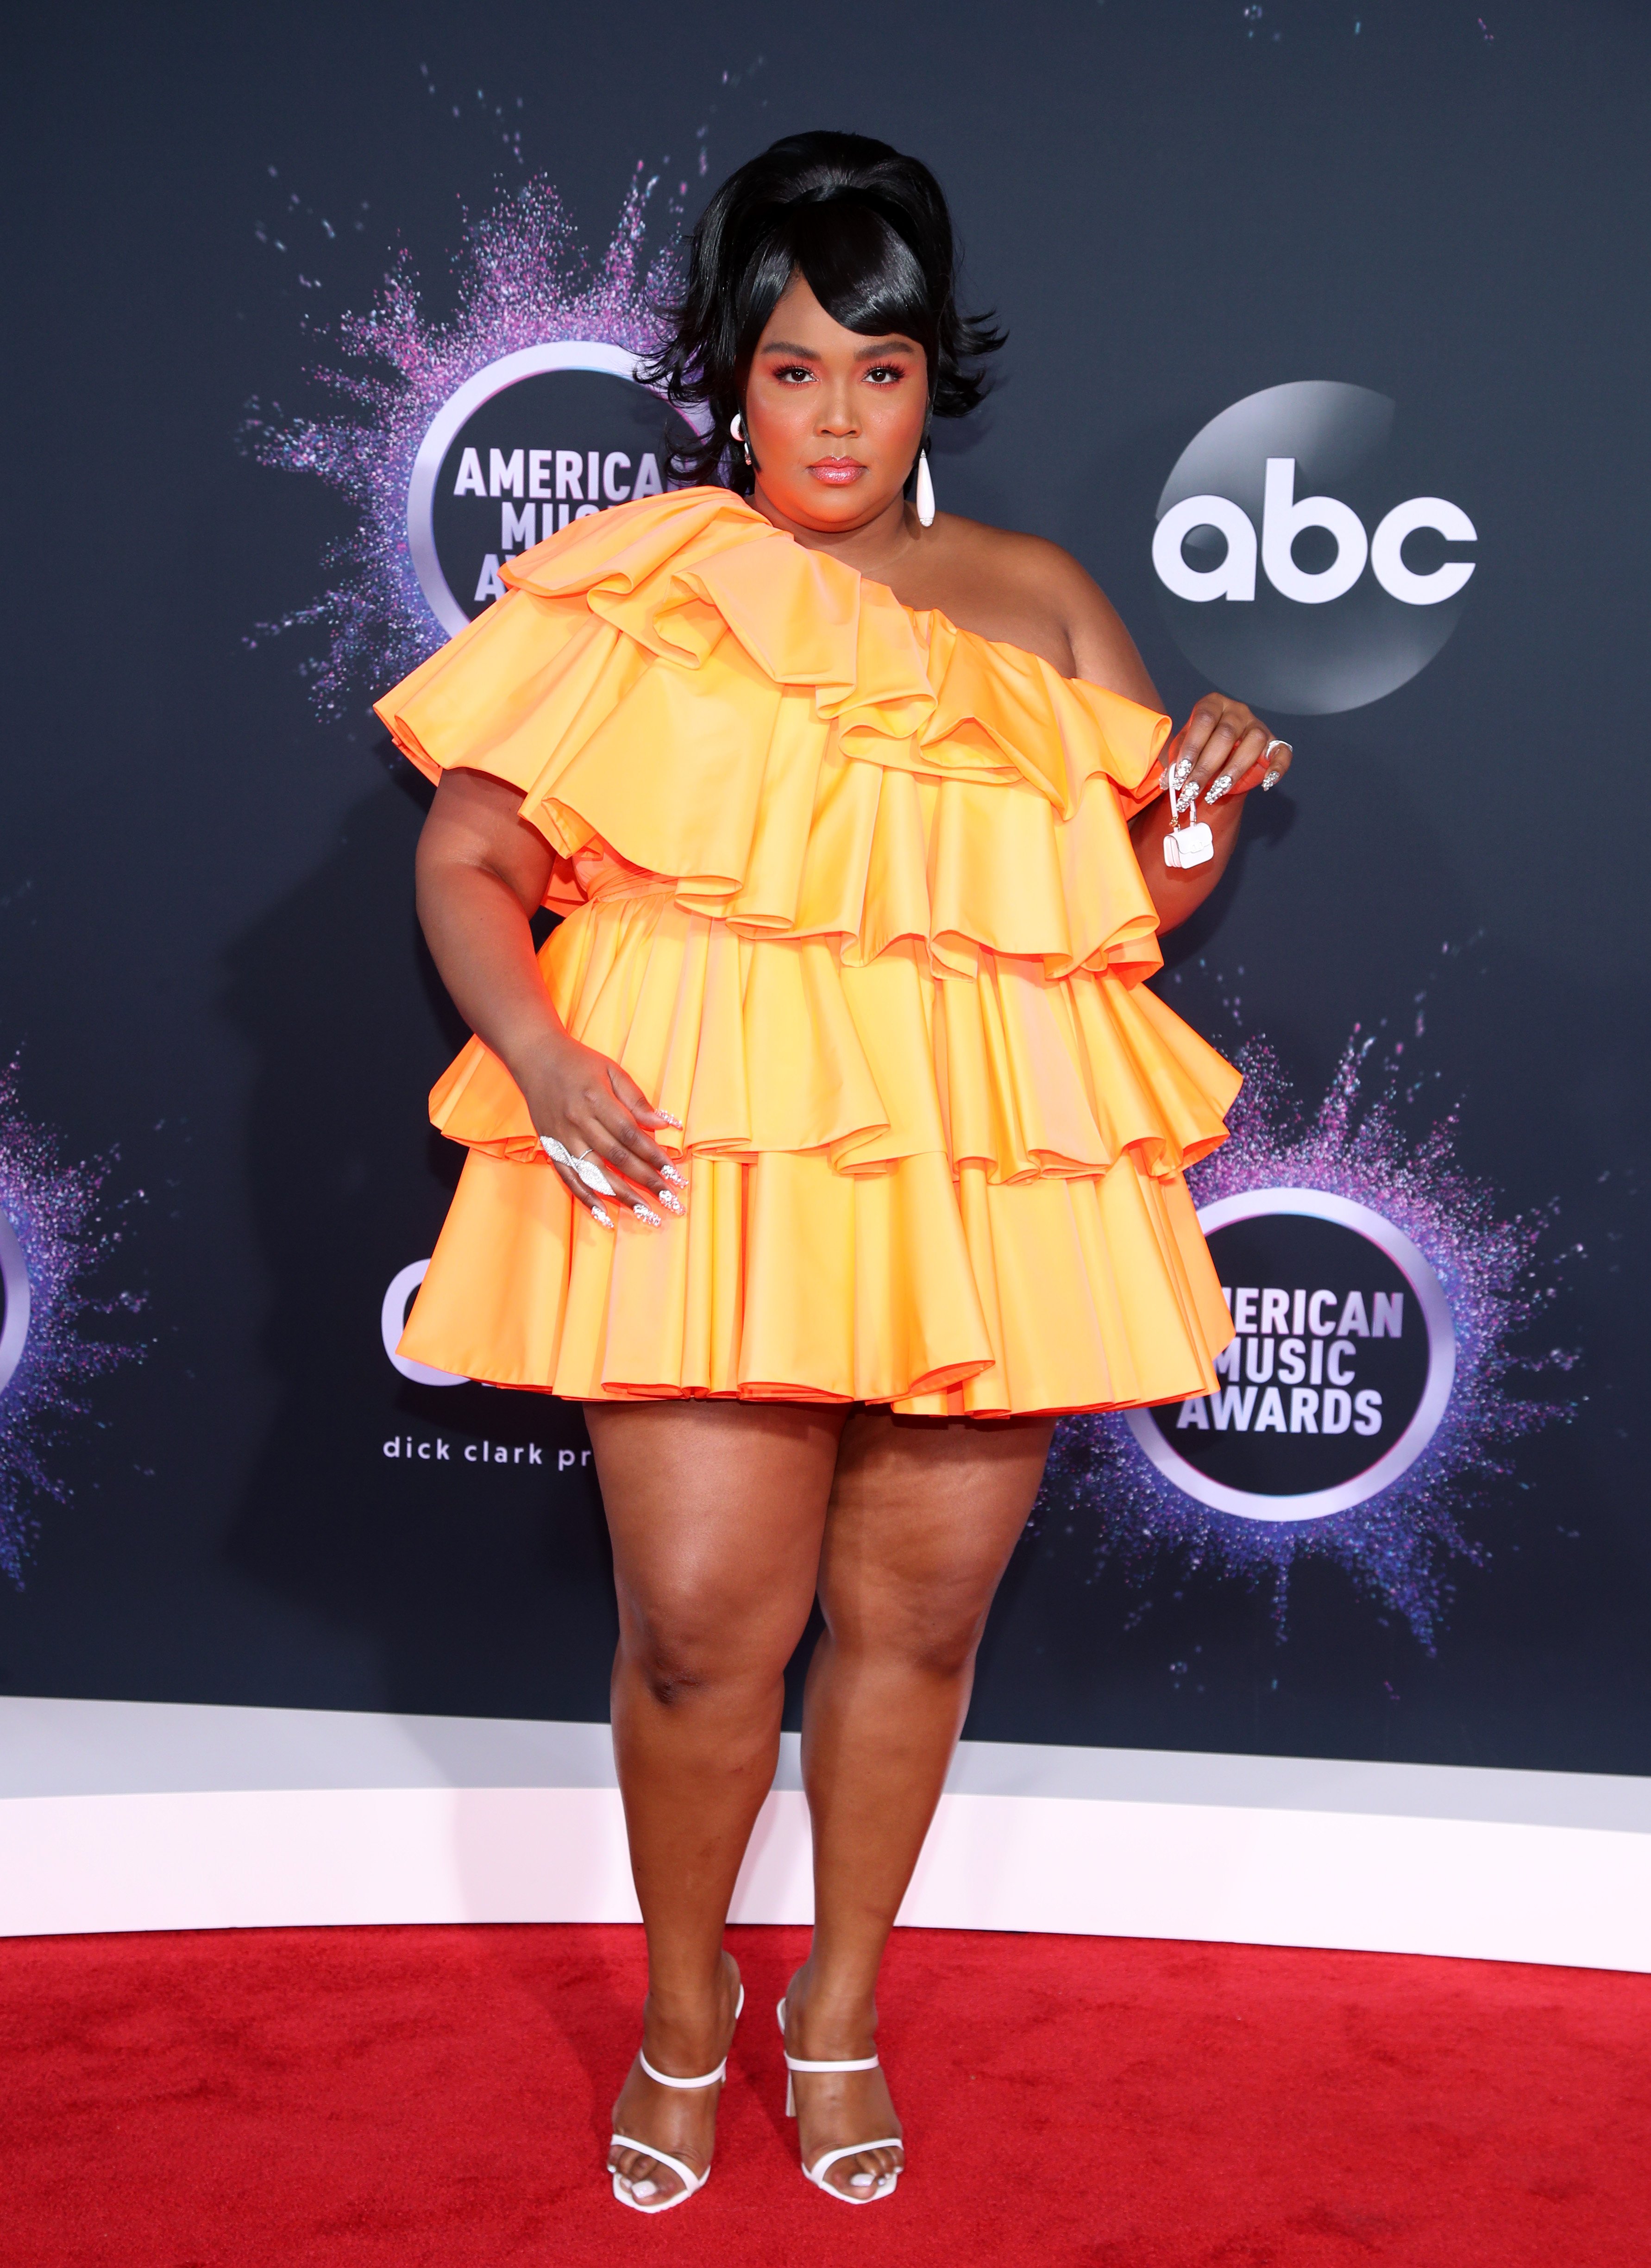 Lizzo at the 2019 American Music Awards at Microsoft Theater in Los Angeles, California on November 24, 2019 | Source: Getty Images